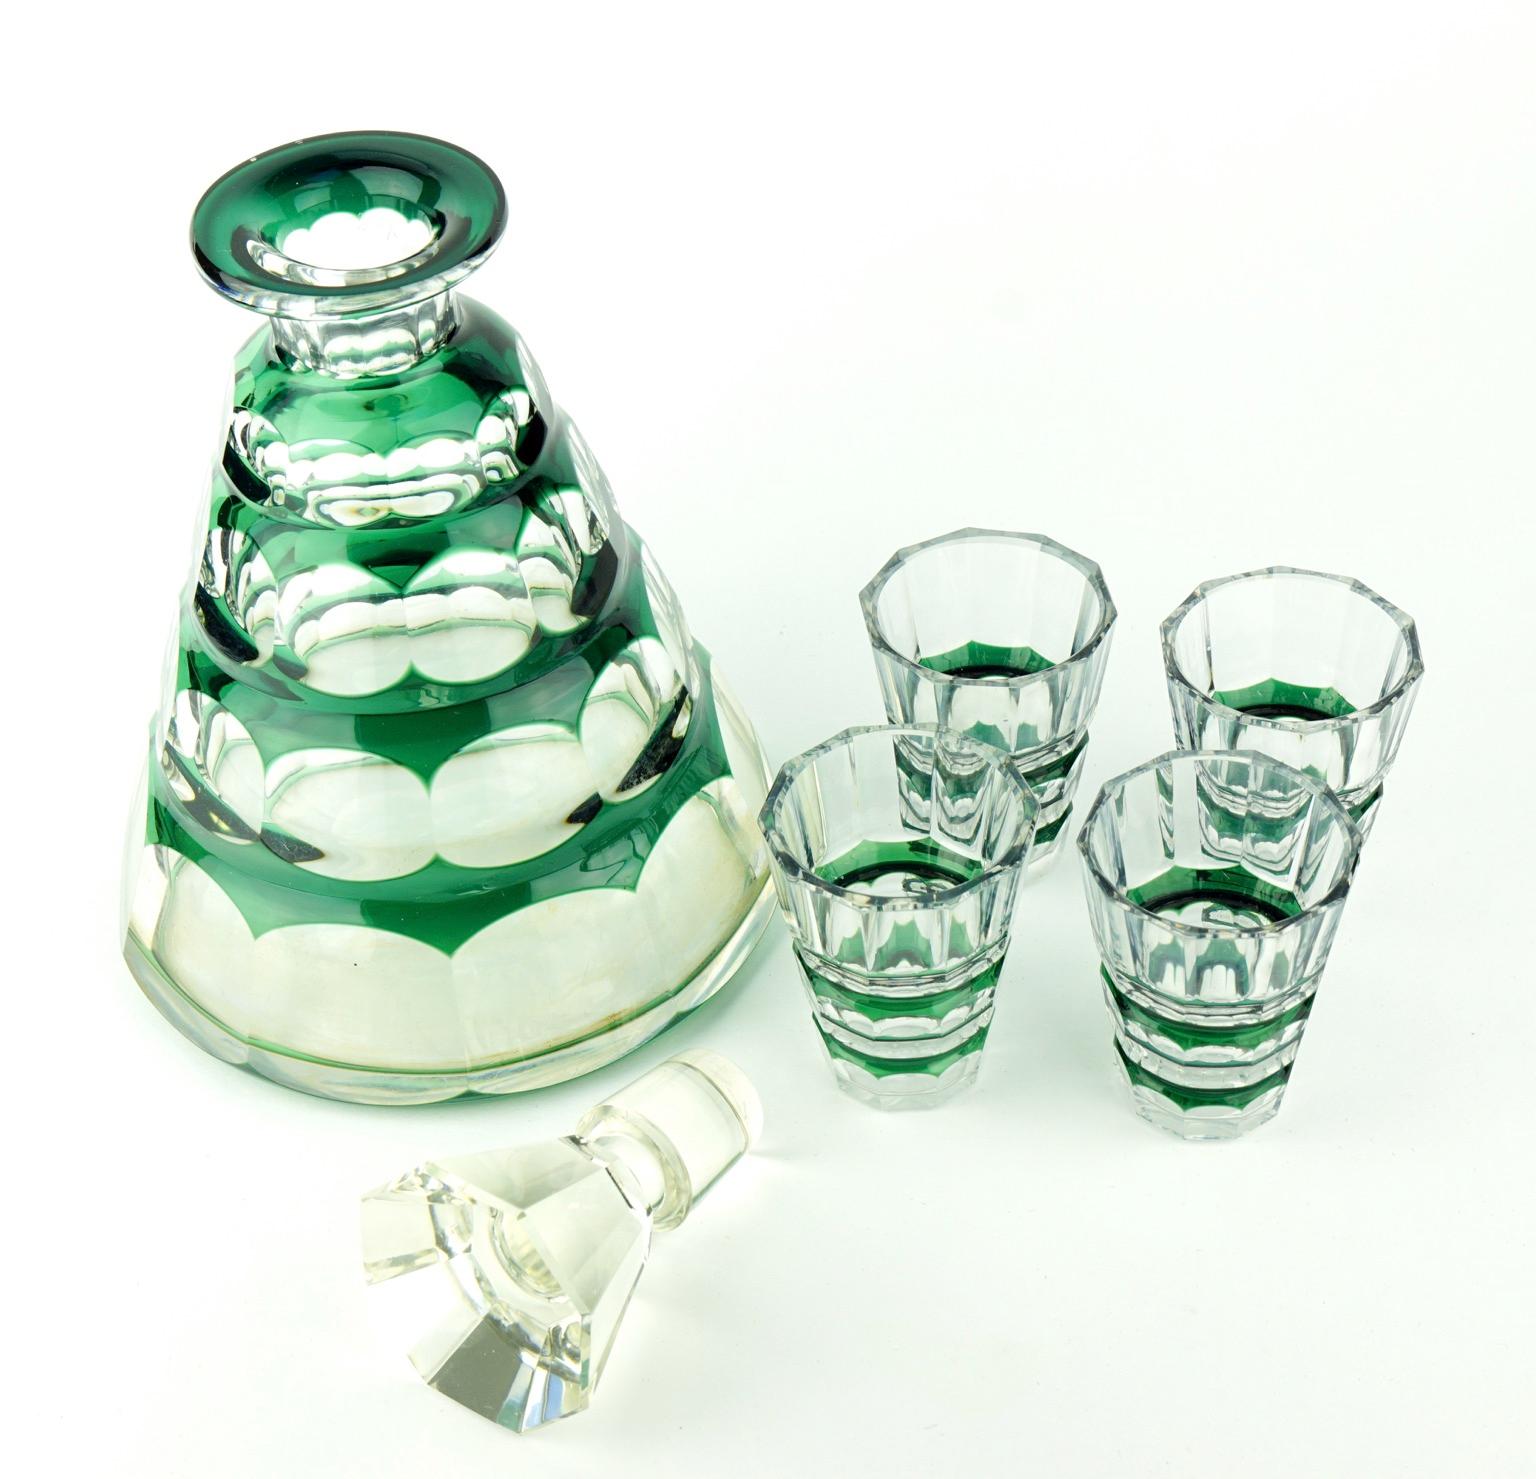 A crystal decanter set with four glasses in very good condition. Original stopper. The decanter has a tapered eight sided panel cut stopper and ten sided facet cut sloped body, the glasses have ten sided bucket forms.

Size:
Decanter, height 22.5